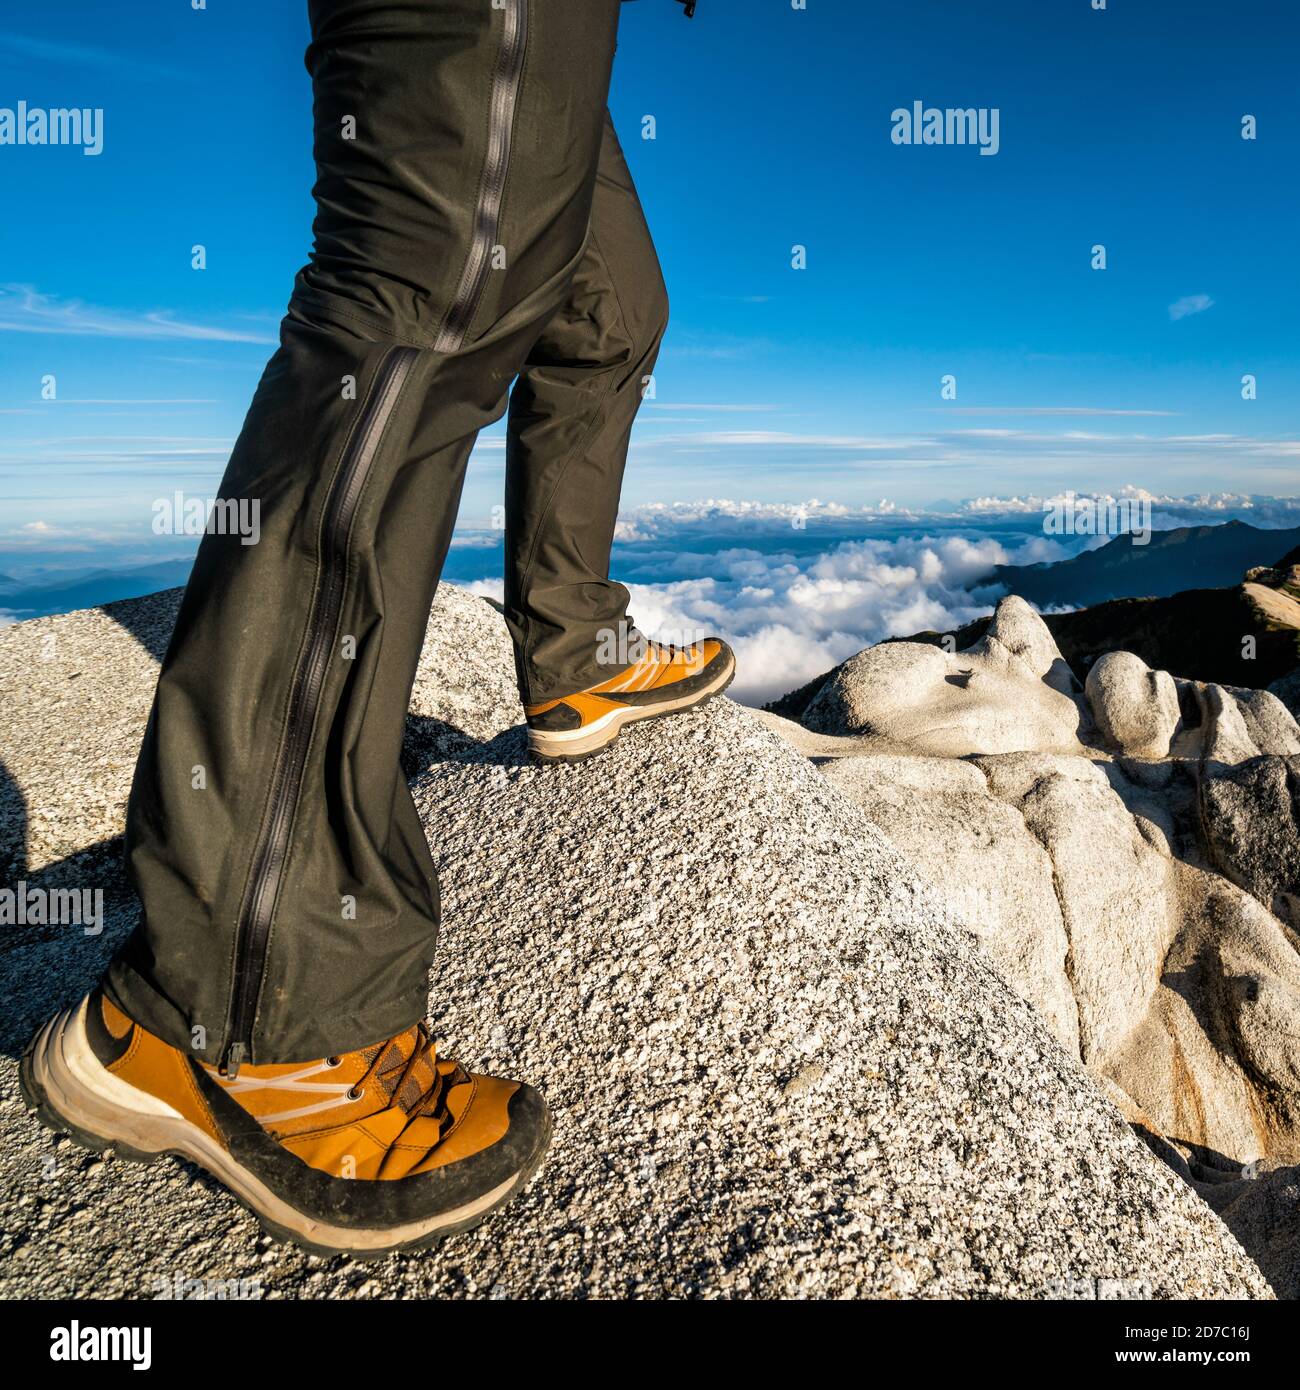 Epic adventure of hiker do trekking activity in mountain of Northern Japan Alps, Nagano, Japan, with panoramic nature mountain range landscape Stock Photo